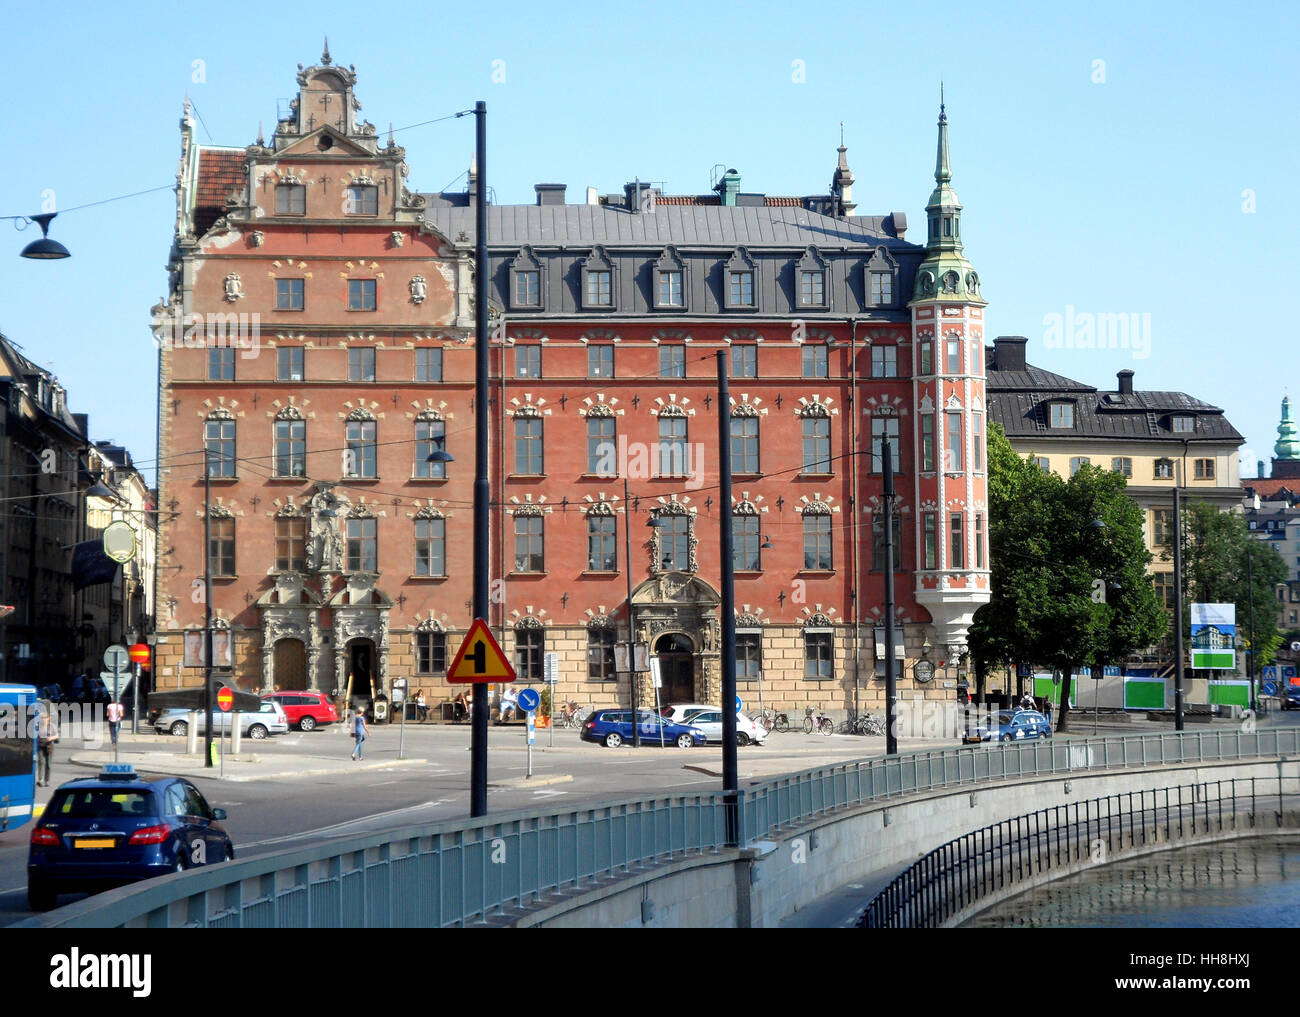 Stockholm city center with the impressive vintage architecture, Sweden Stock Photo